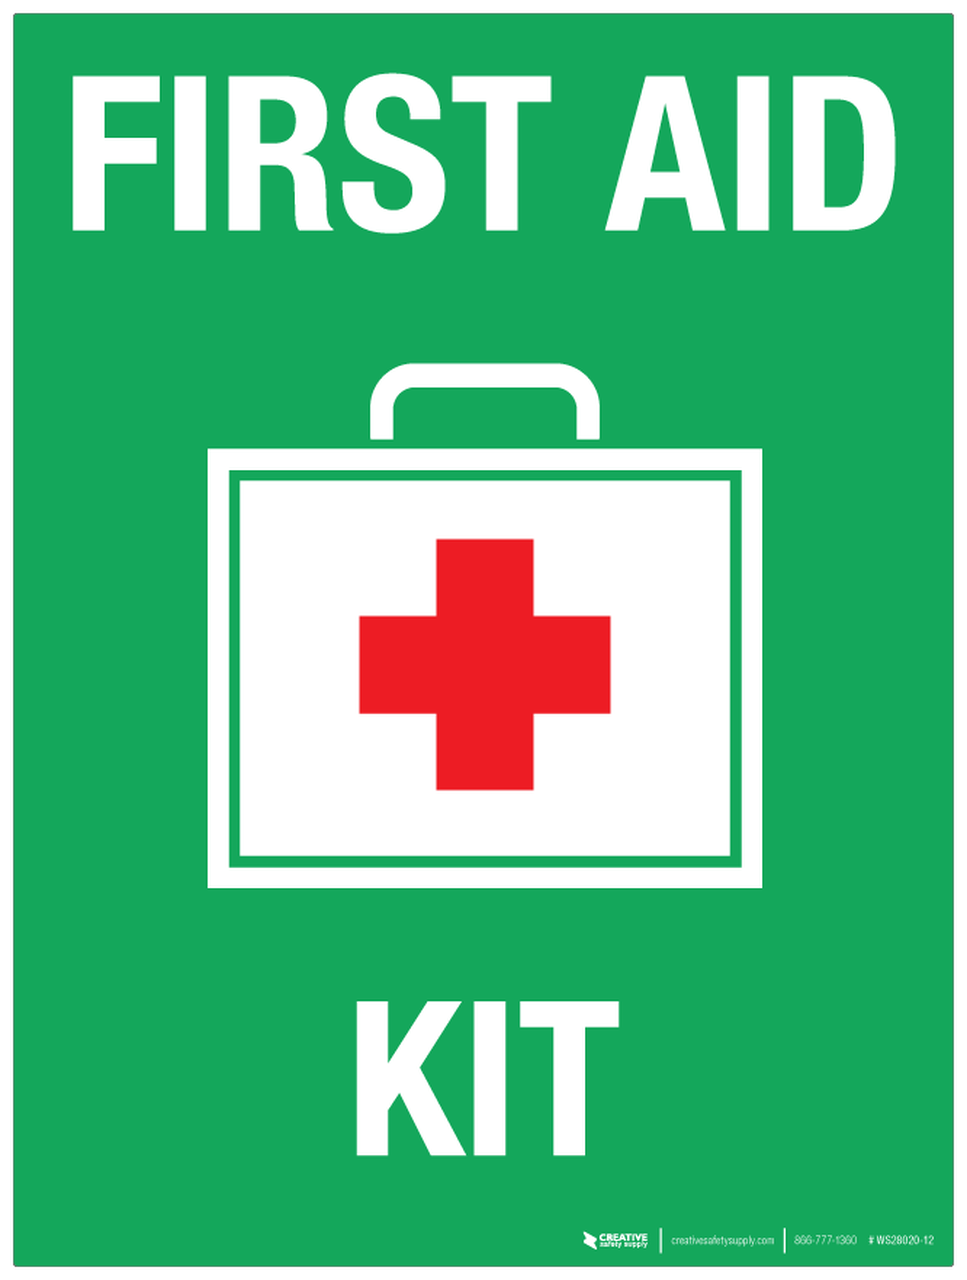 Detail First Aid Box Images Nomer 16